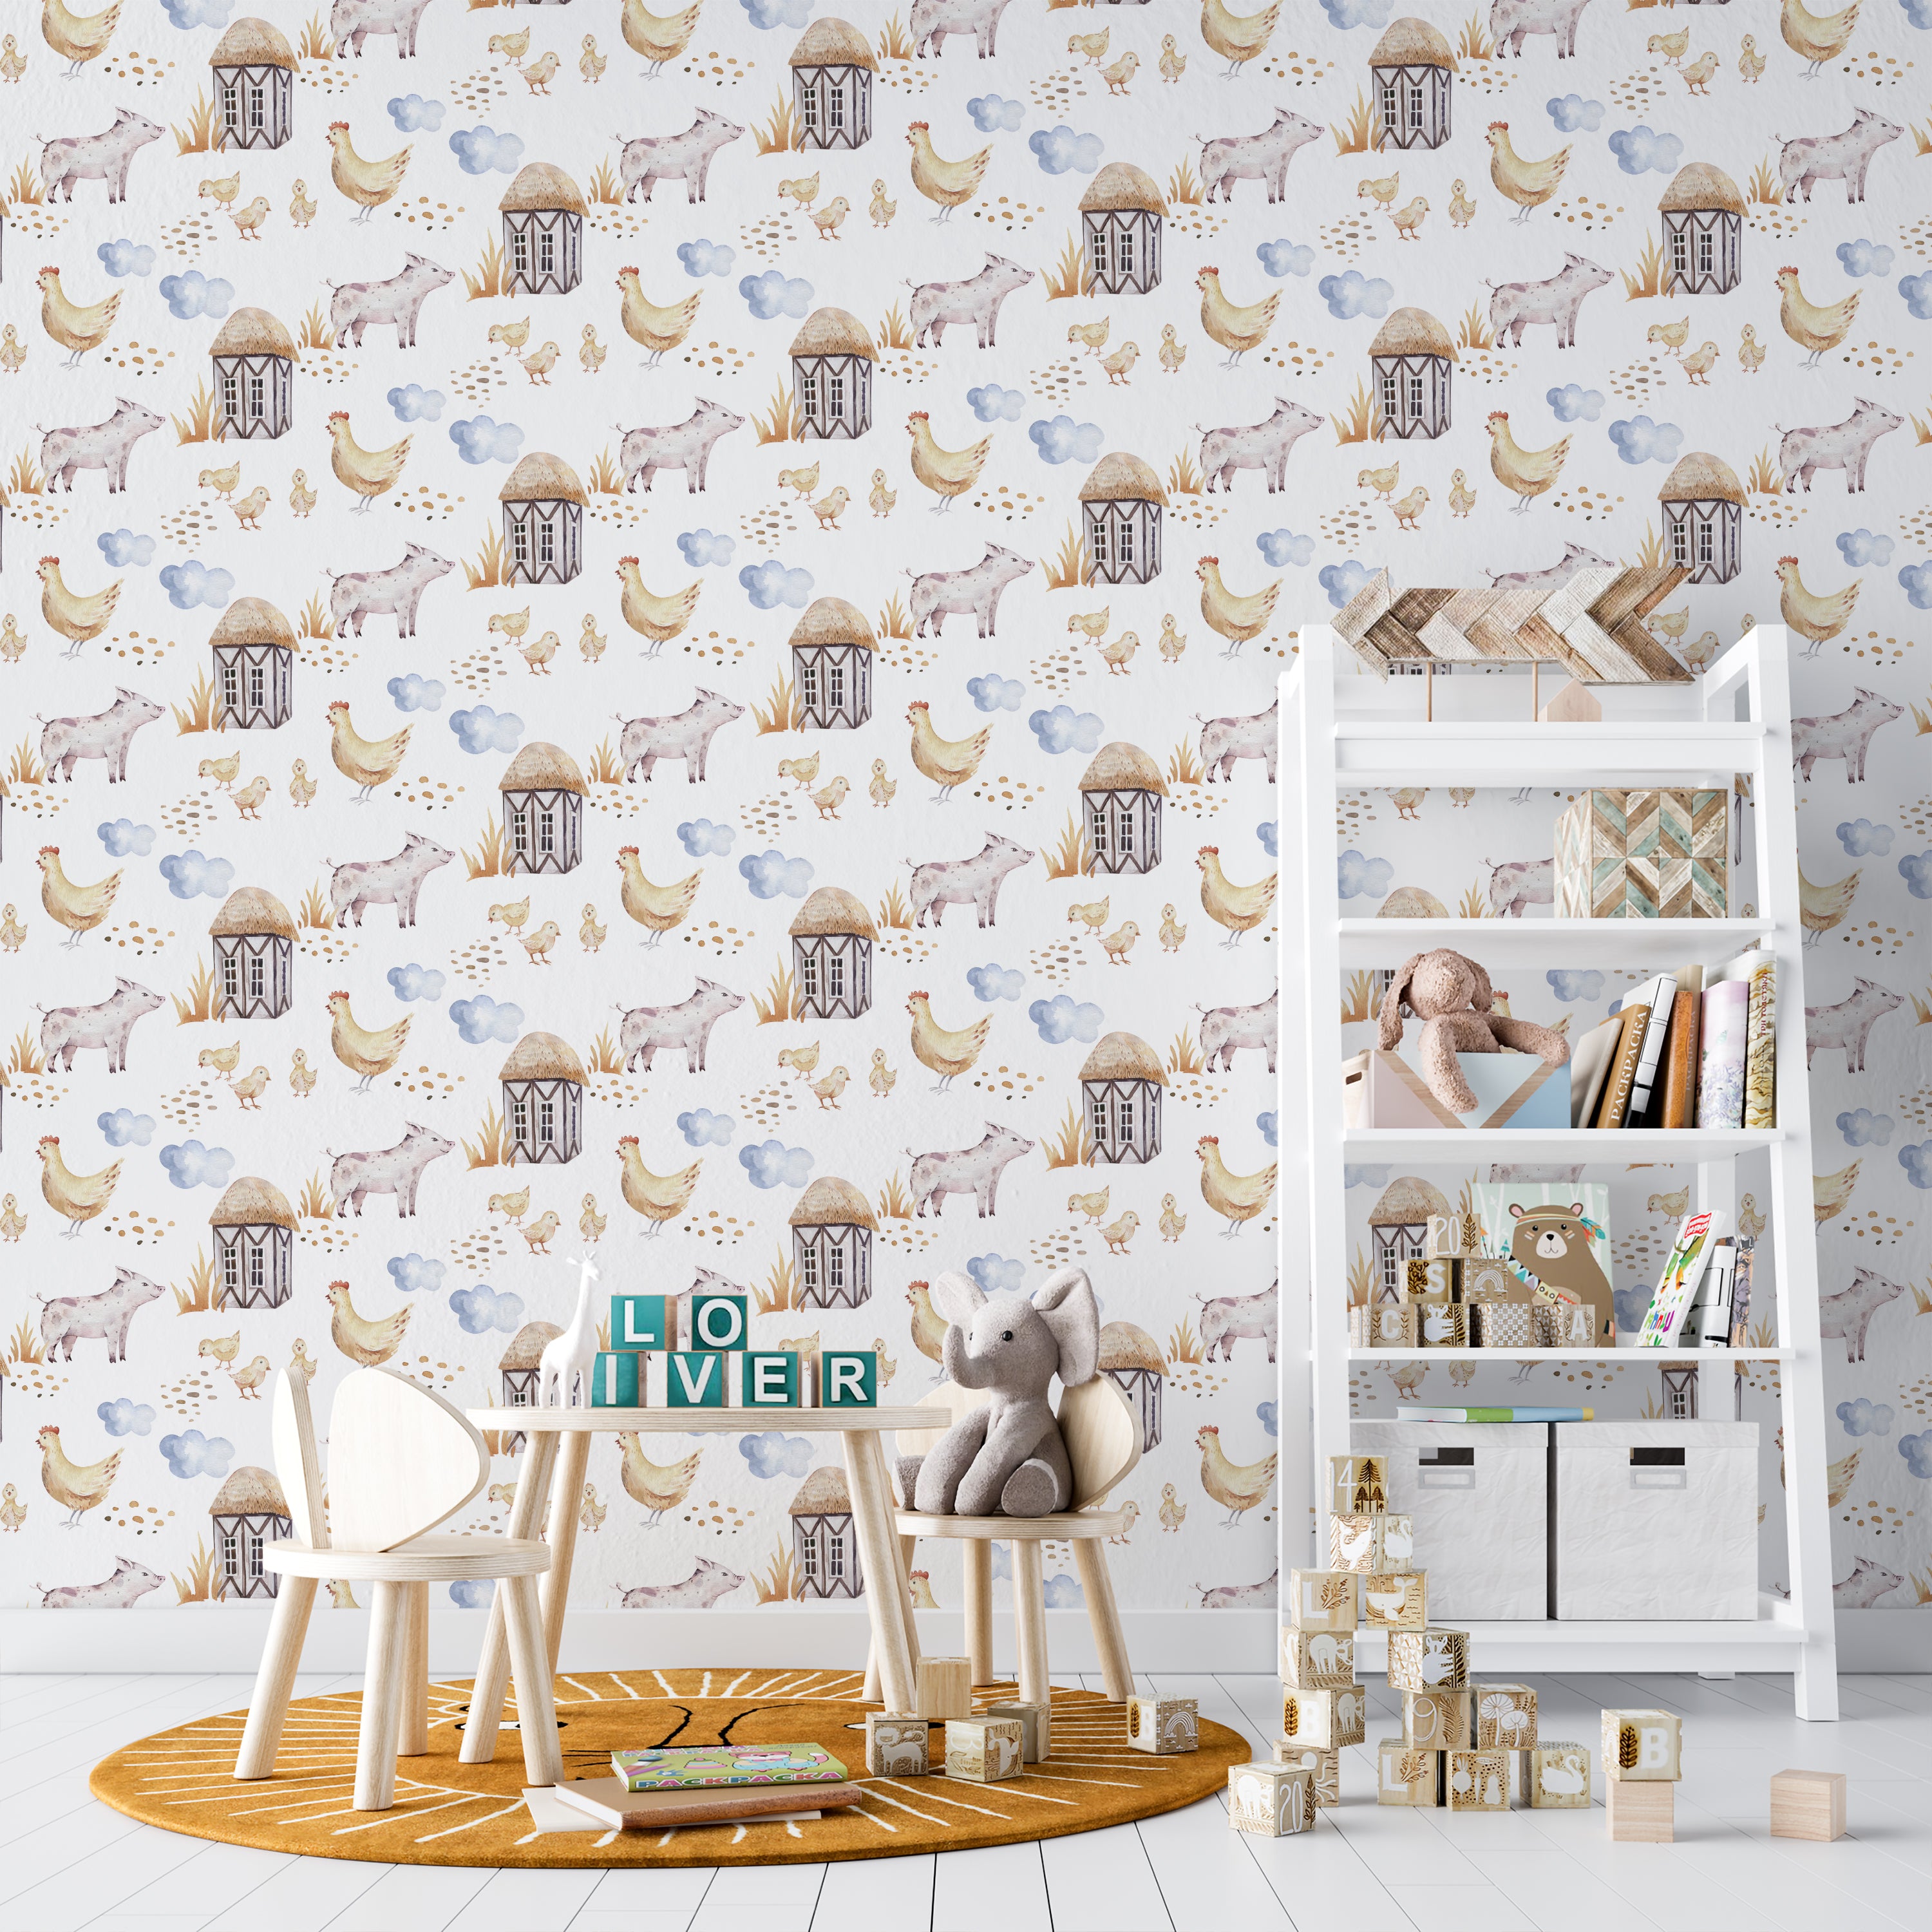 A cozy nursery showcasing walls covered with 'Watercolor Farm Animals' wallpaper. The wallpaper features a serene farm scene with chickens, pigs, farmhouses, and clouds. The room is furnished with a white shelf filled with children's books and toys, enhancing the room's warm and inviting atmosphere